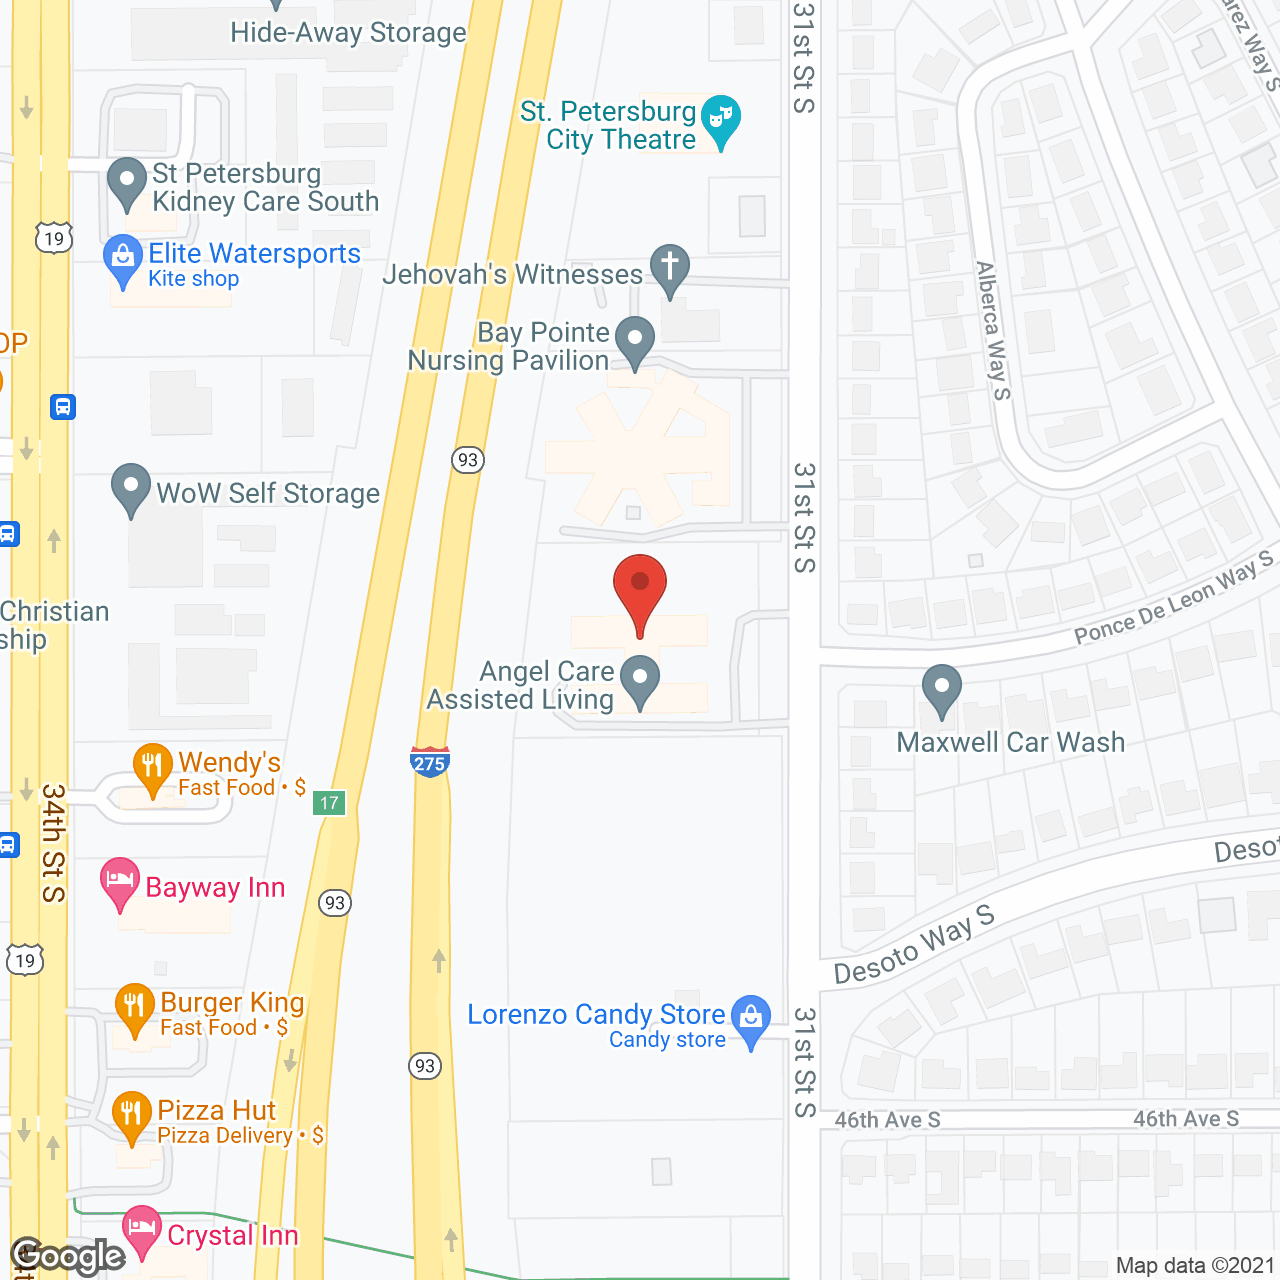 Angel Care Assisted Living in google map